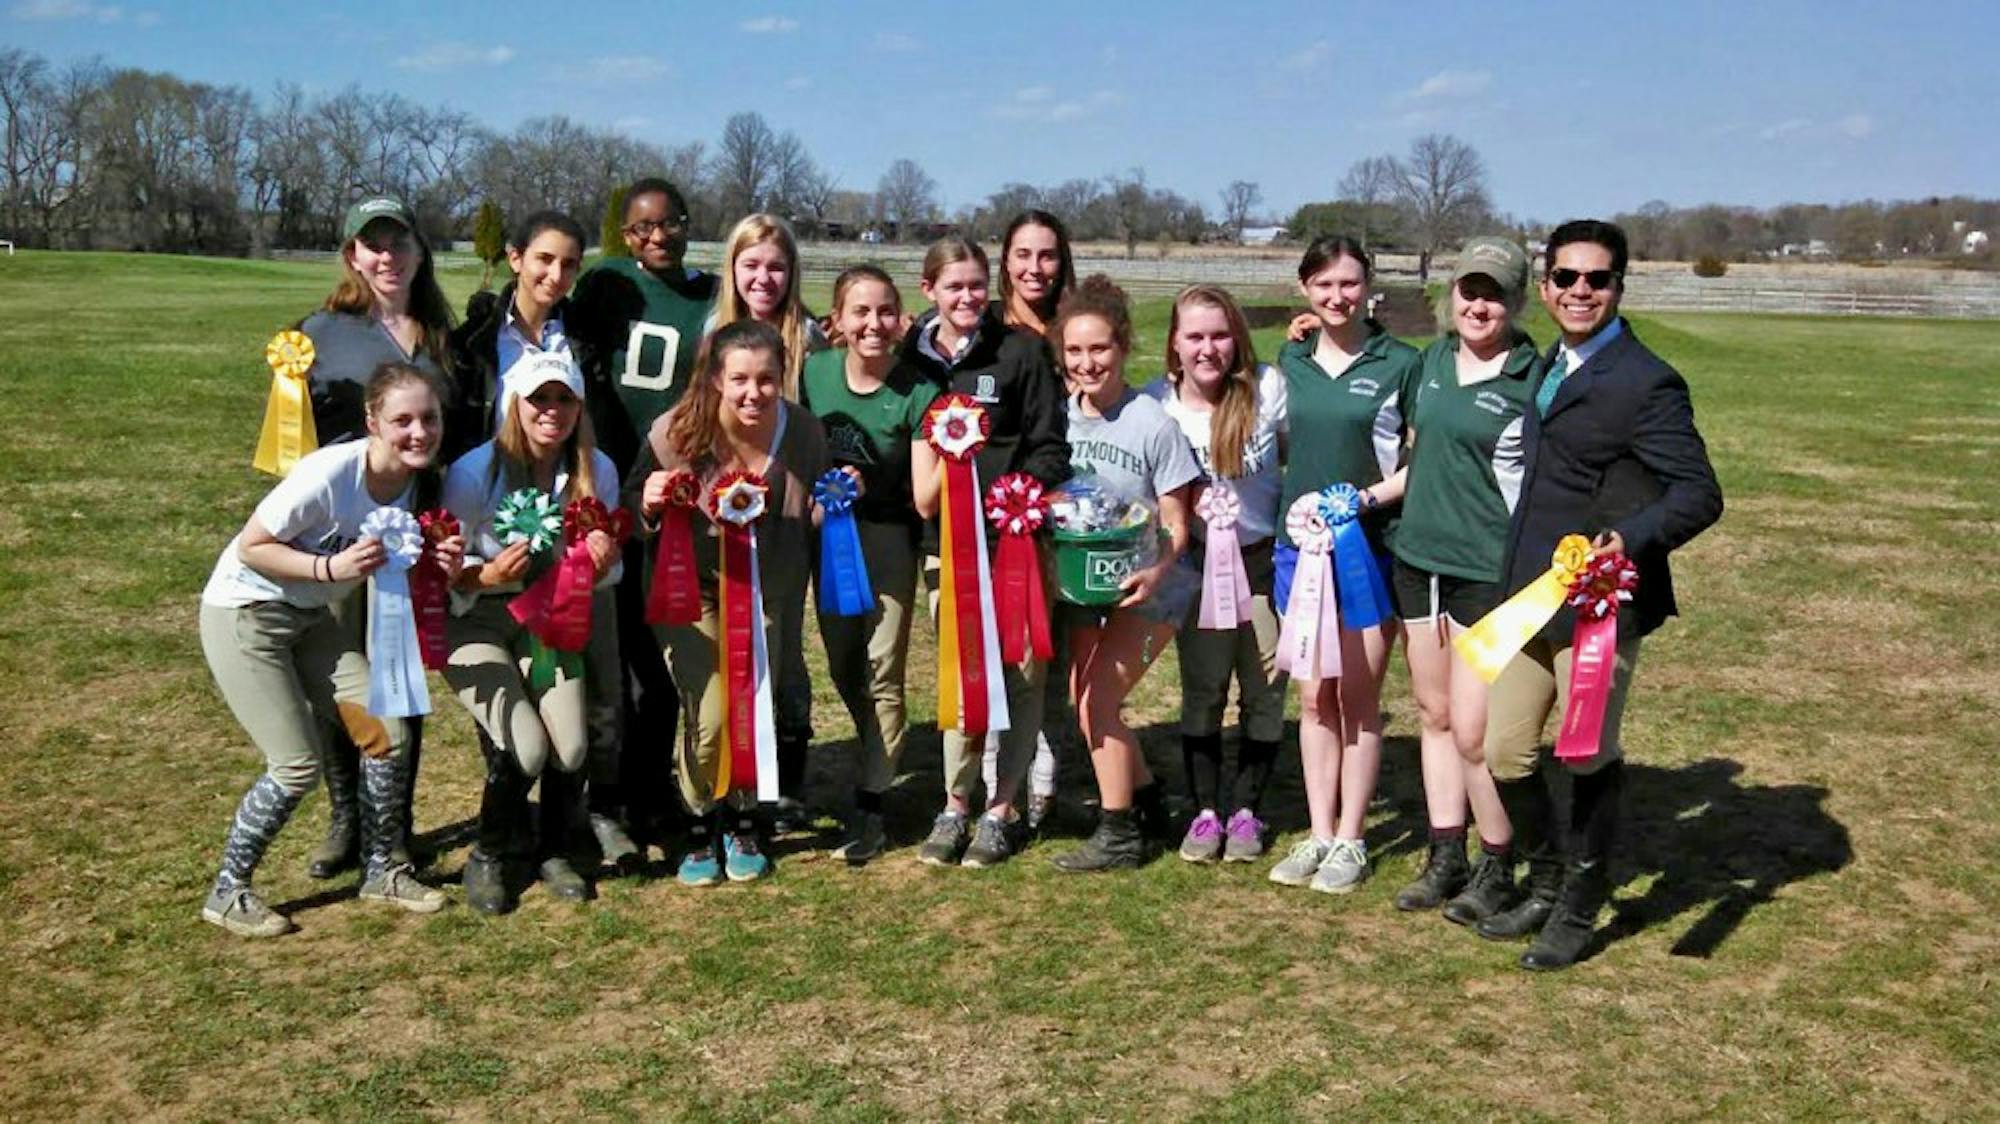 The equestrian team took second at the Ivy League Championships on Saturday, finishing three points behind Cornell University.